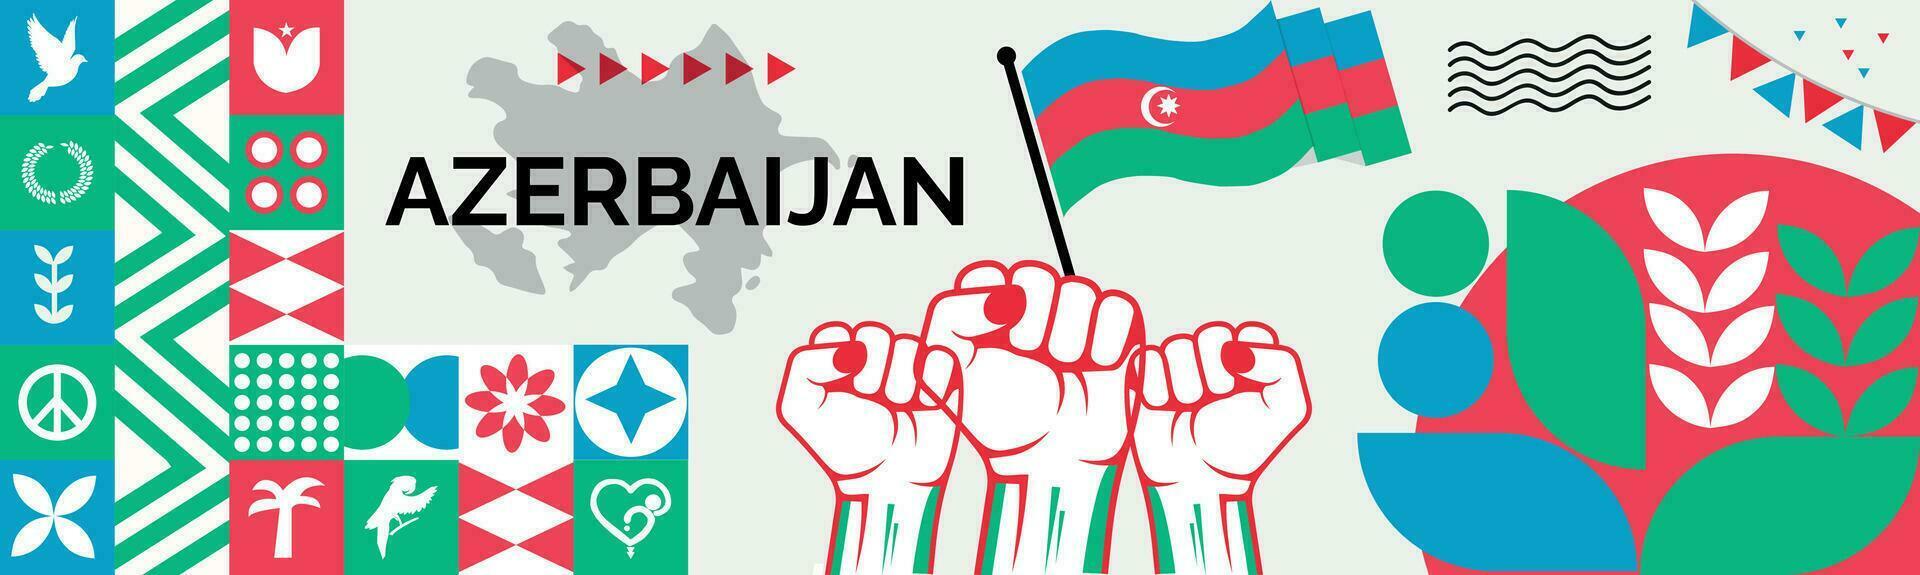 AZERBAIJAN Map and raised fists. National day or Independence day design for AZERBAIJAN celebration. Modern retro design with abstract icons. Vector illustration.